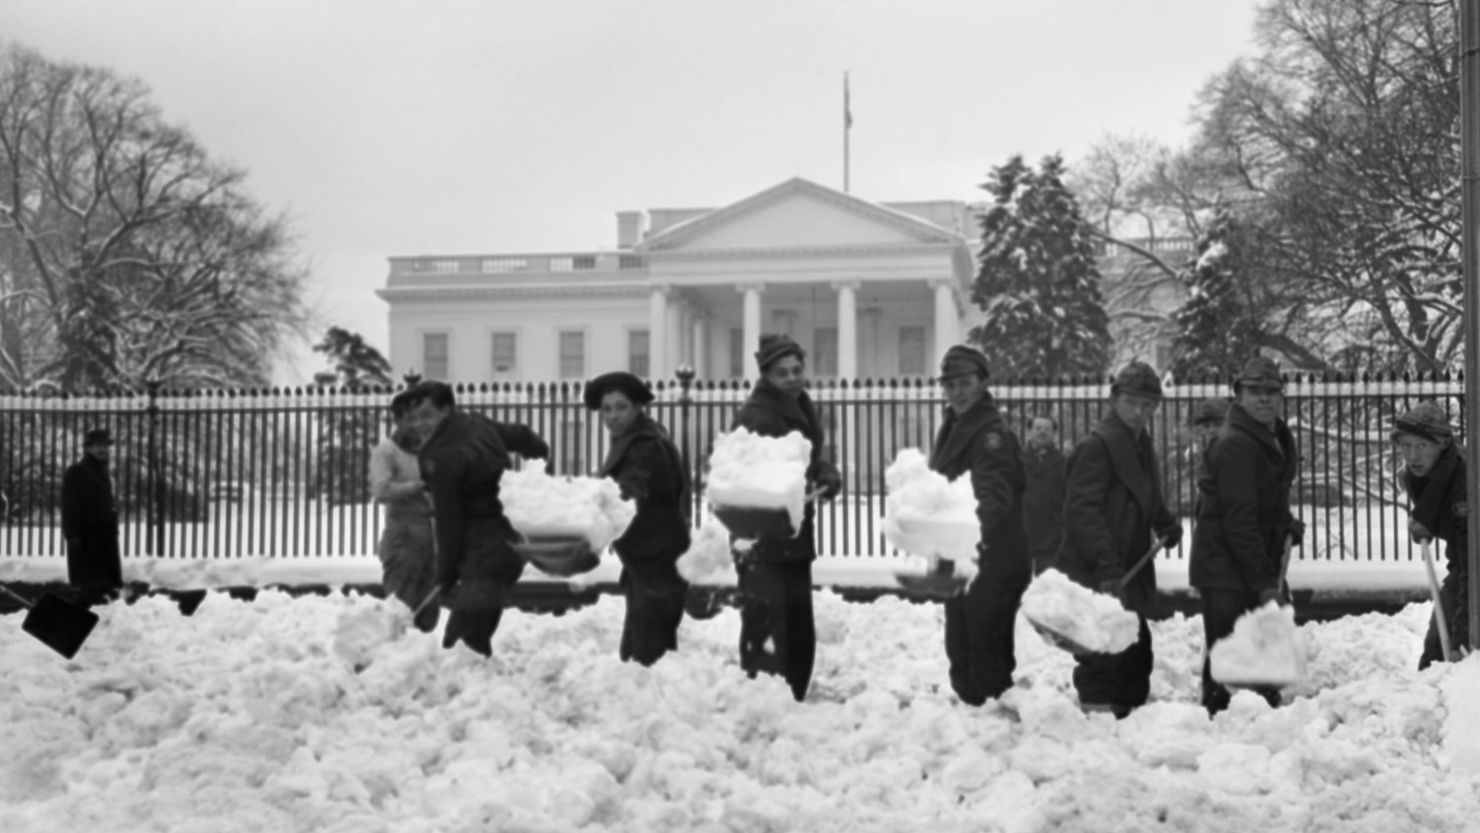 In this March 8, 1941, file photo, Civilian Conservation Corps members from a camp near Washington work to clear White House walks and drives after a snowstorm.